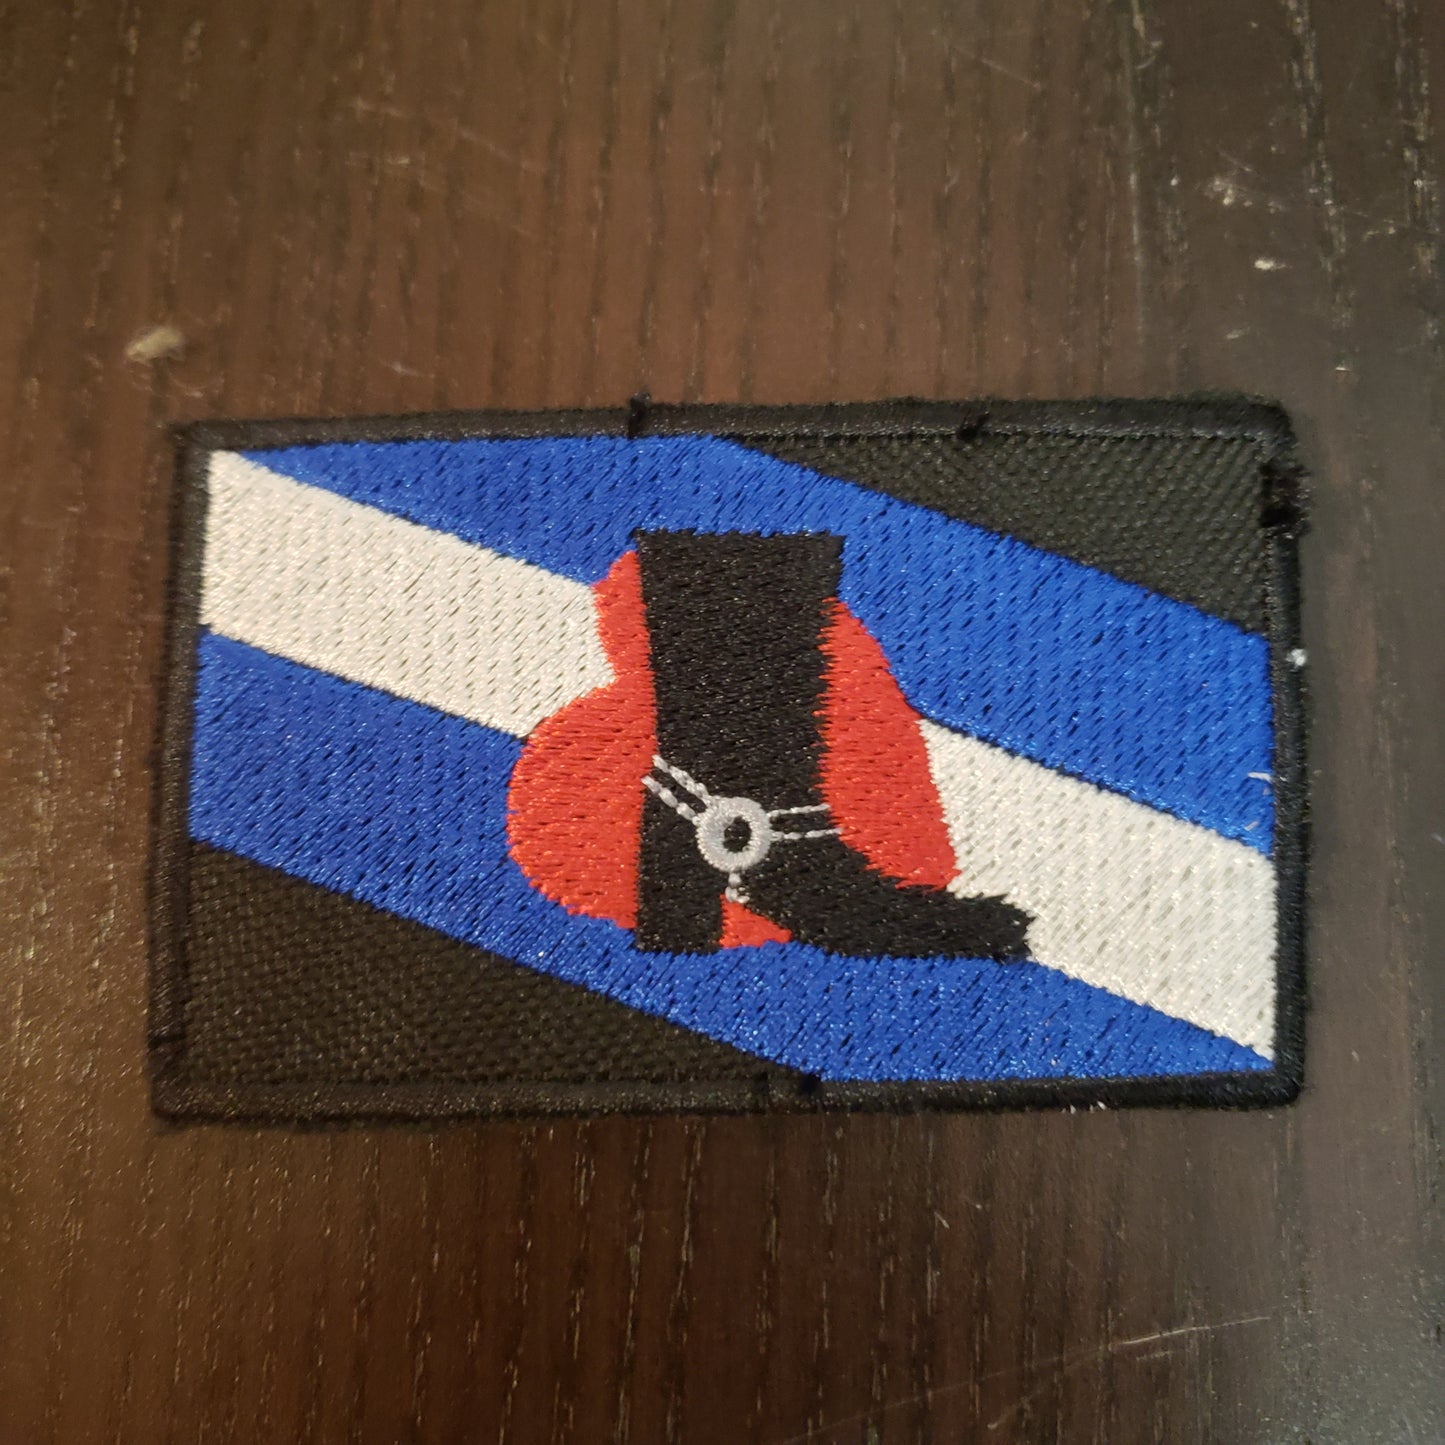 The Leather Bootblack Leather Bar Lapel Patch.